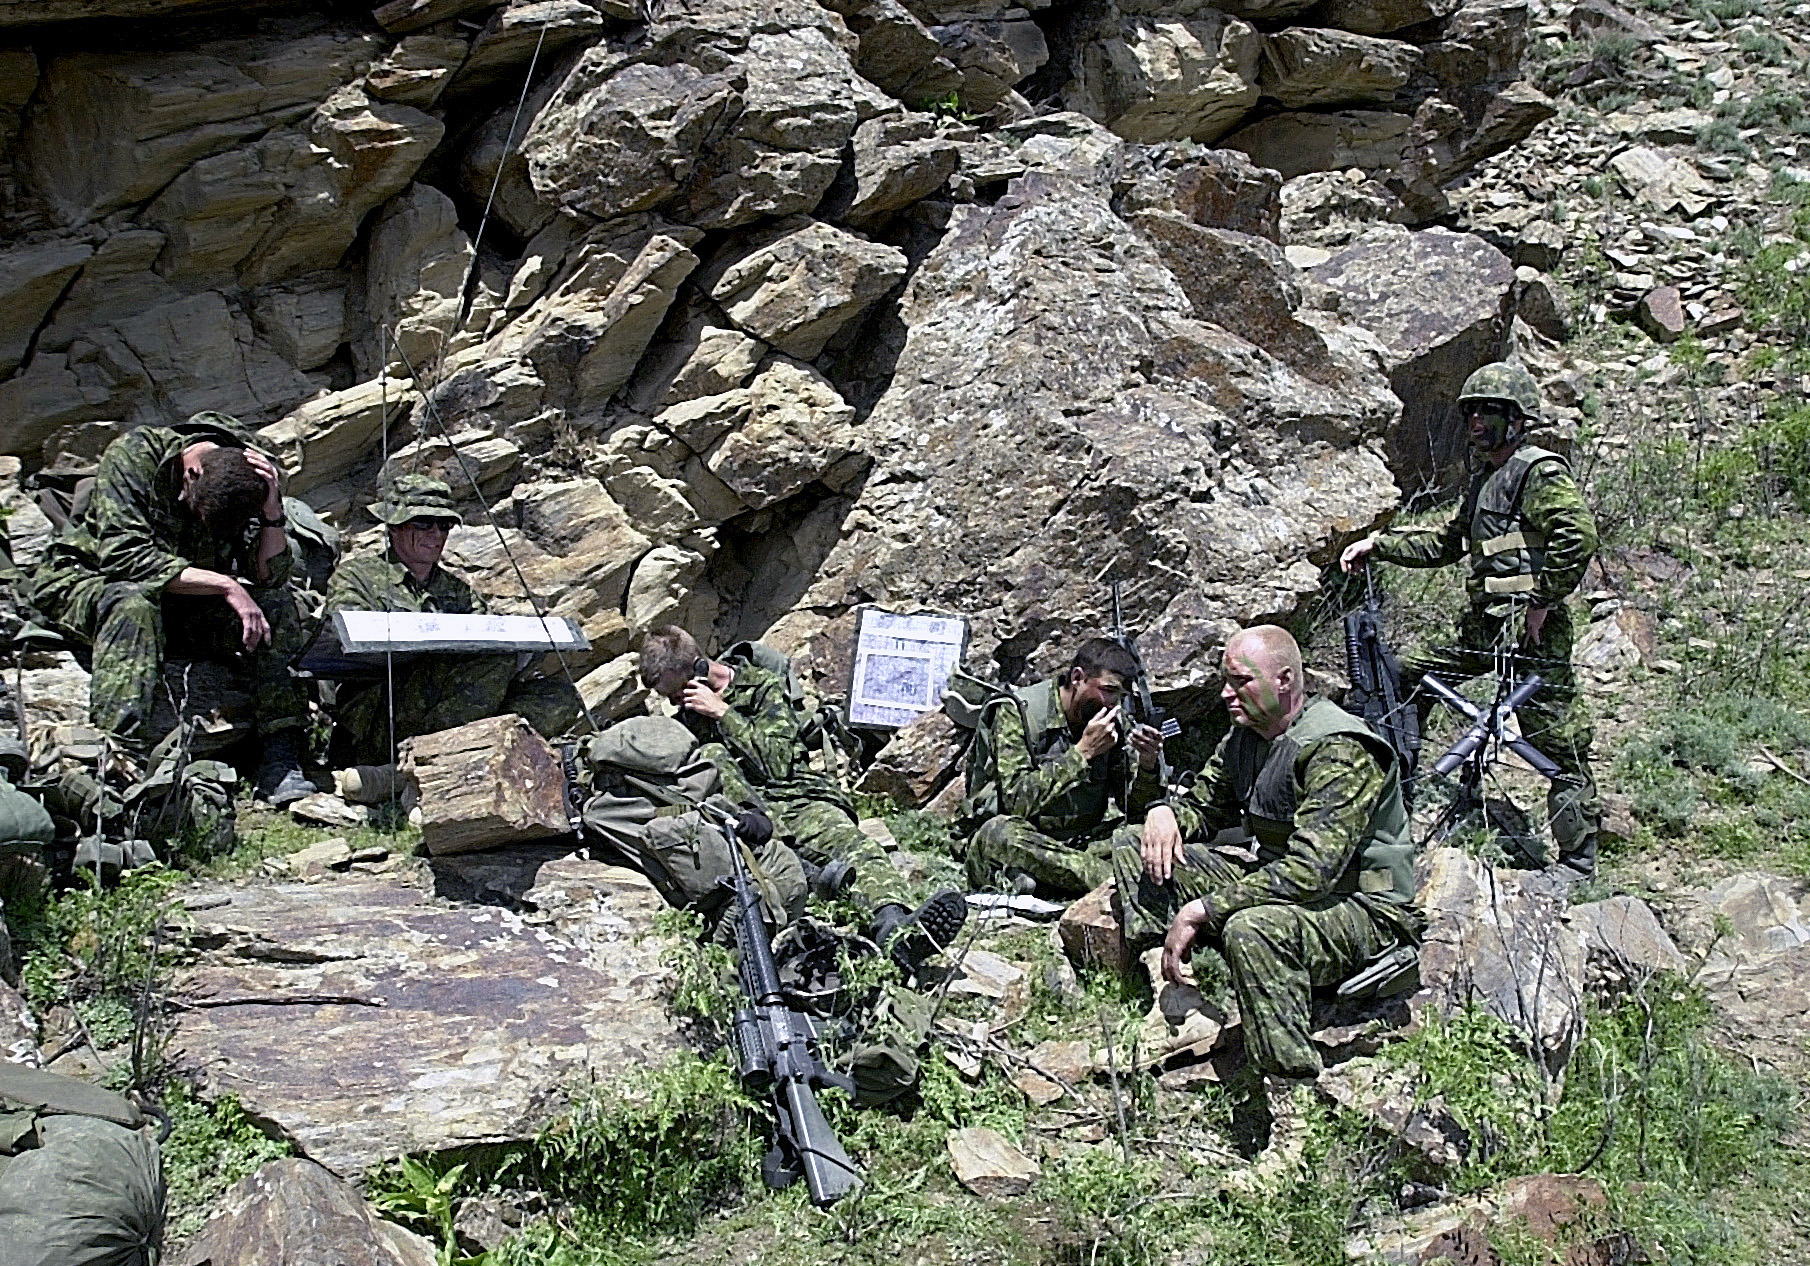 Camouflaged soldiers sit outside a cave. They hold guns and wait for something.